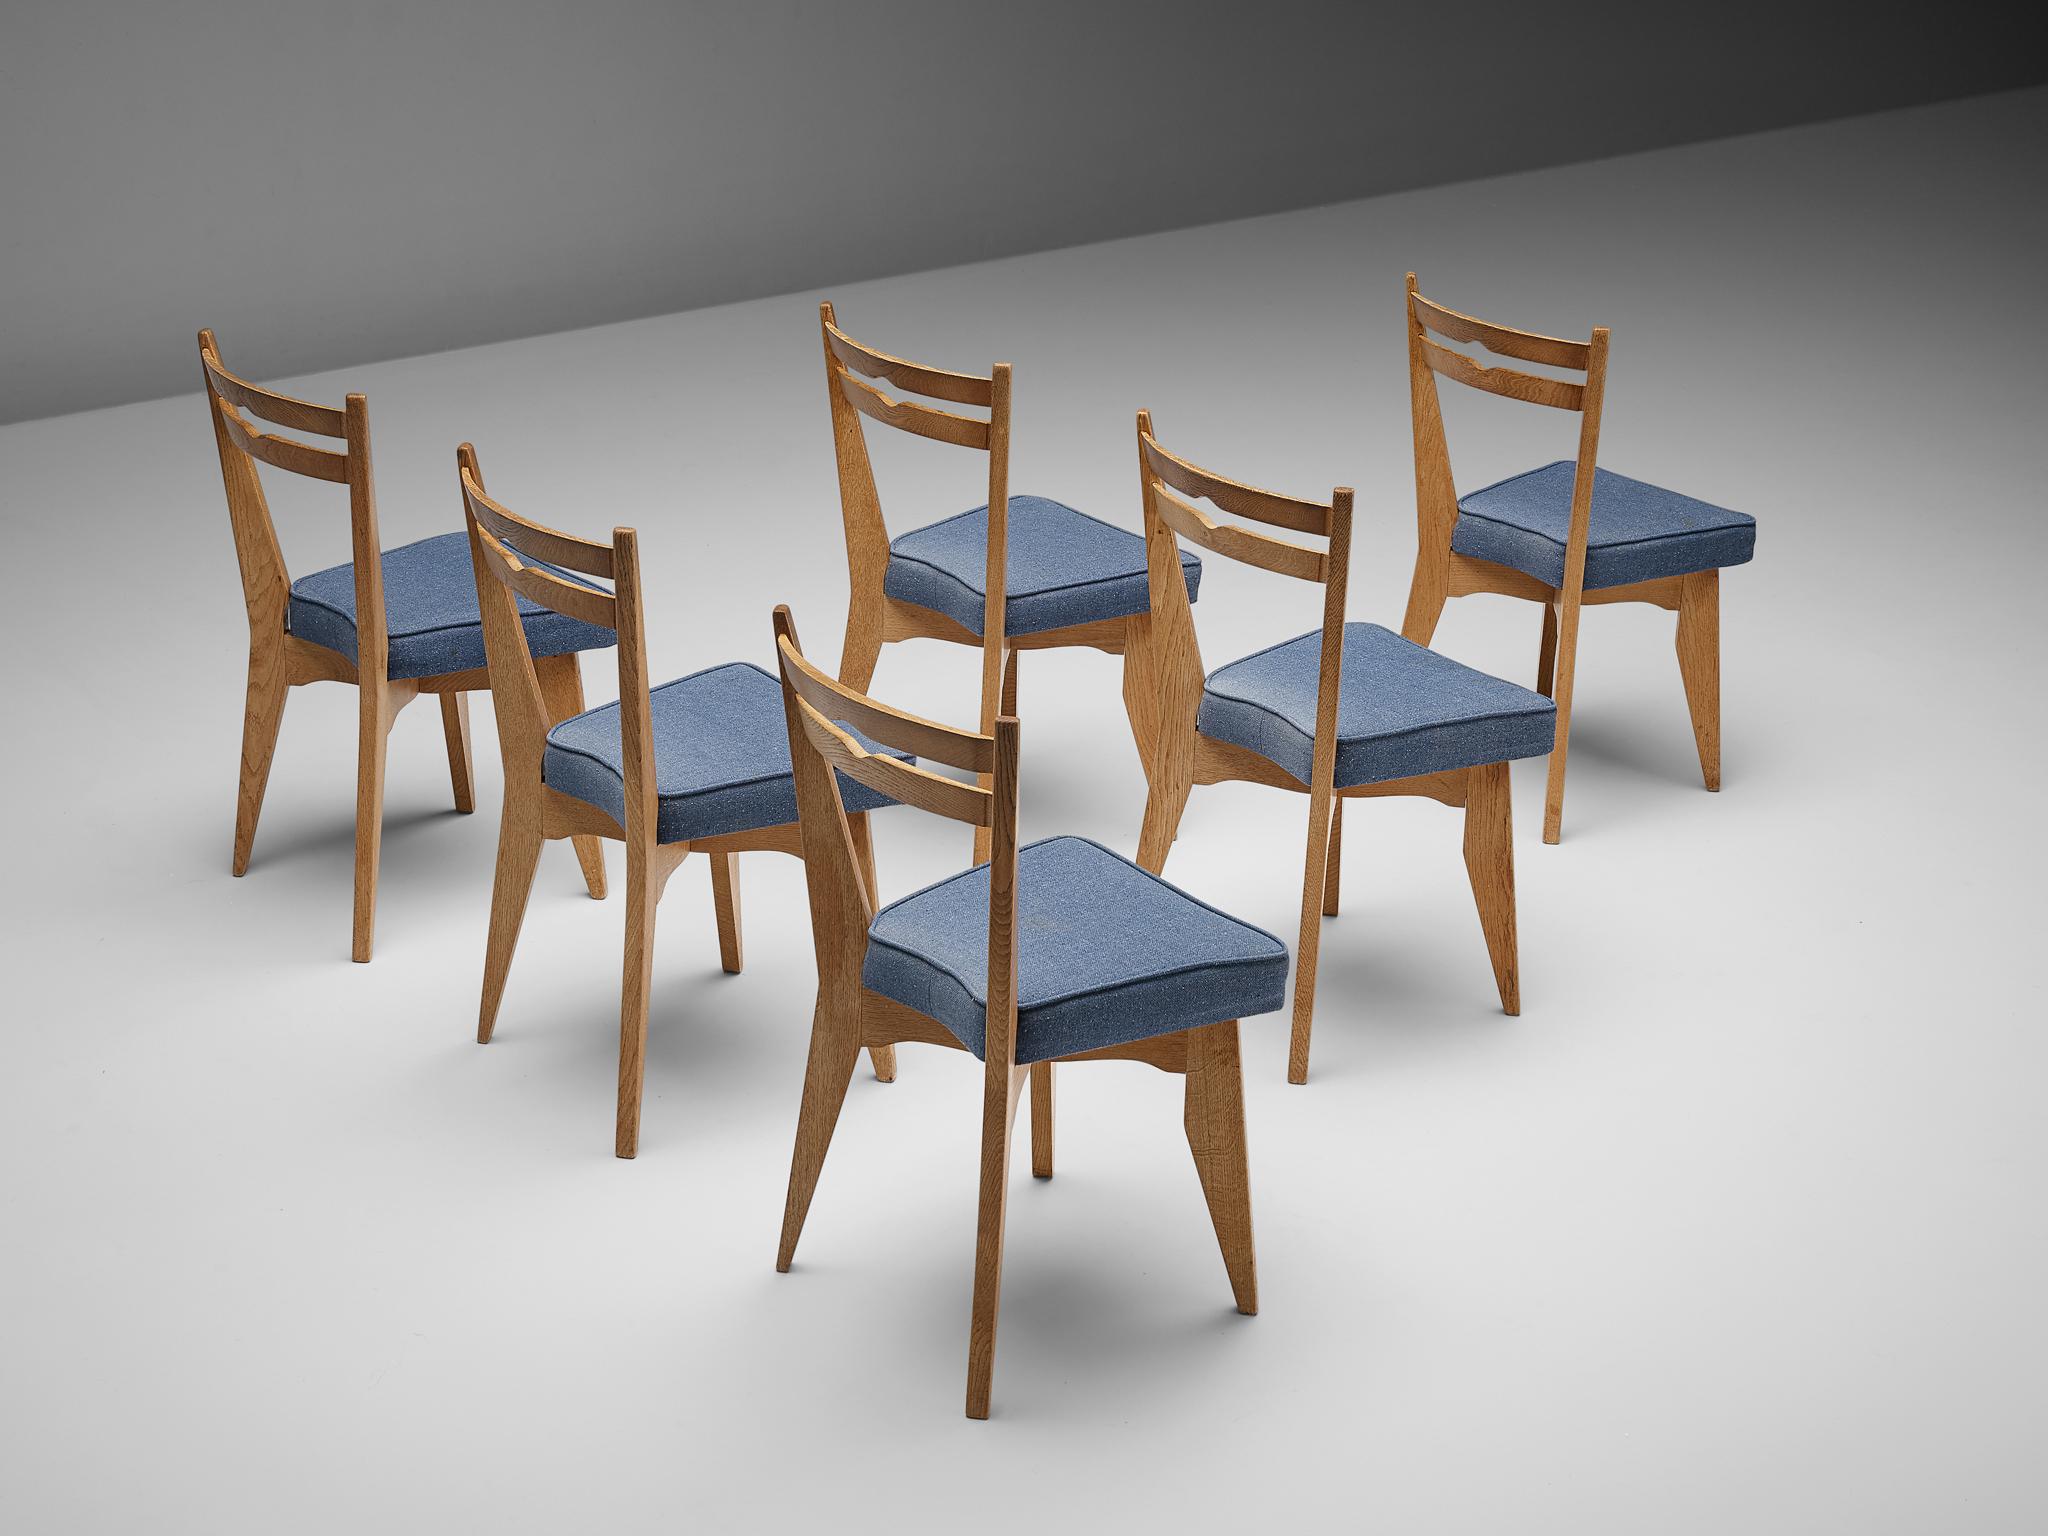 Guillerme et Chambron, set of six dining chairs, solid oak, fabric upholstery, France, 1960s

These dining chairs in solid oak are designed by the French designer duo Jacques Chambron and Robert Guillerme. On four tapered legs rests the seating with